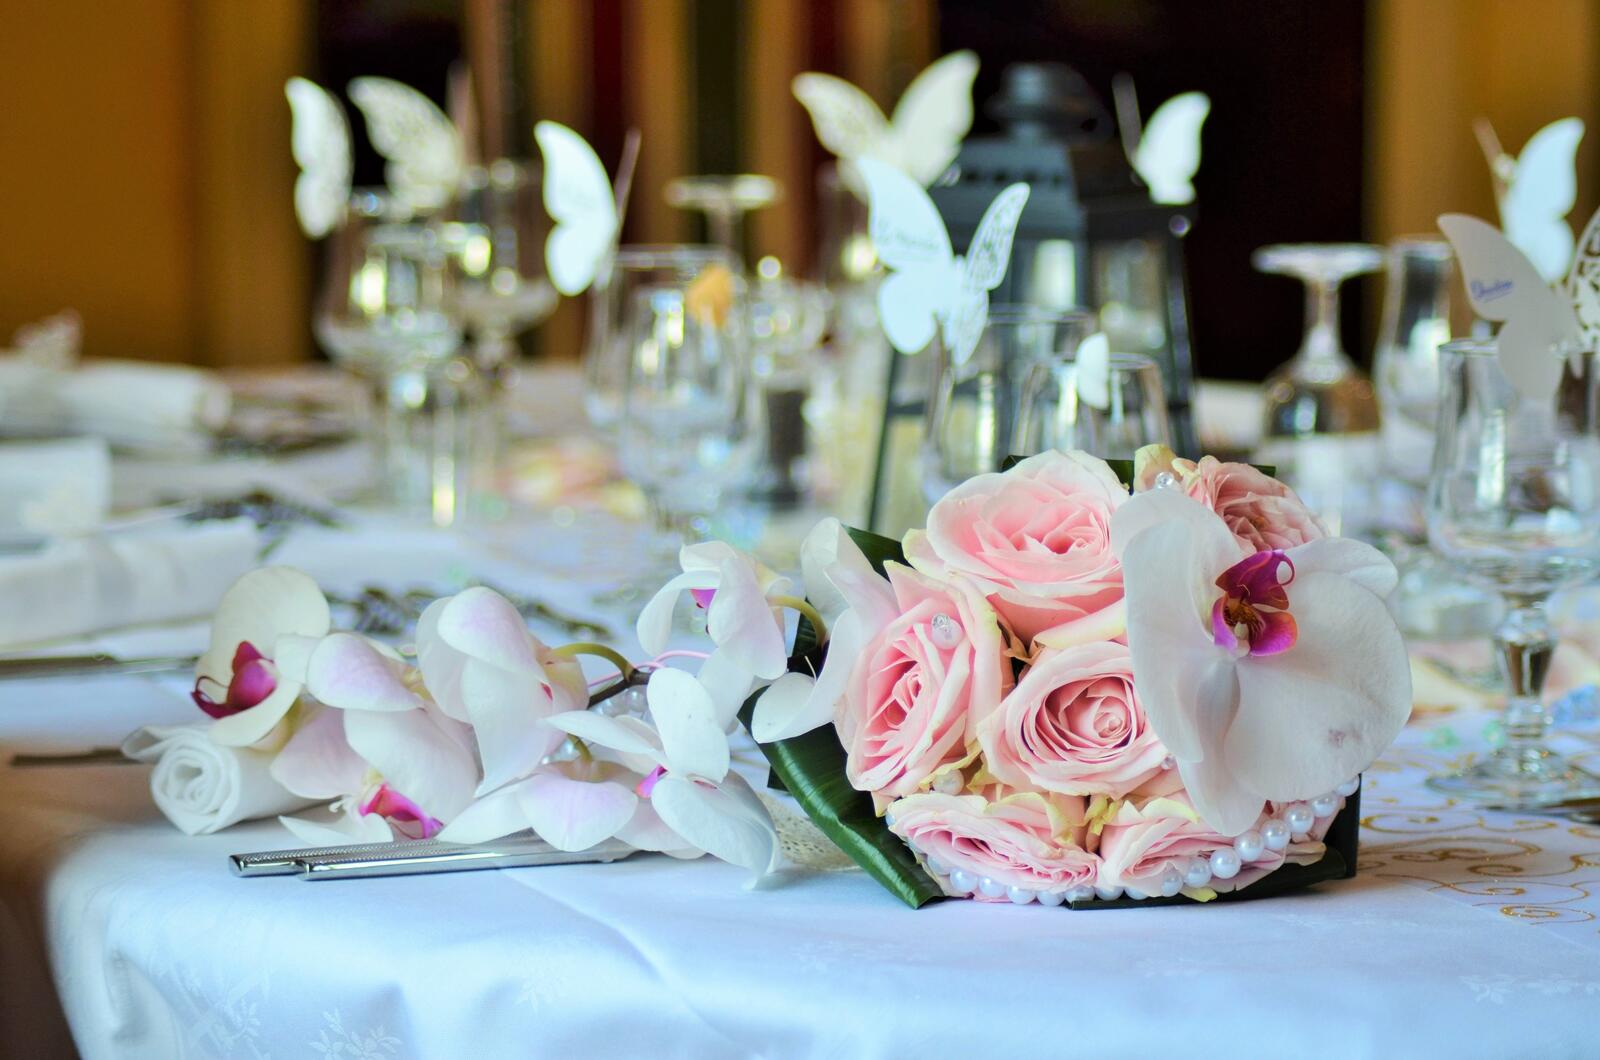 Free photo A wedding bouquet of flowers lies on a set table